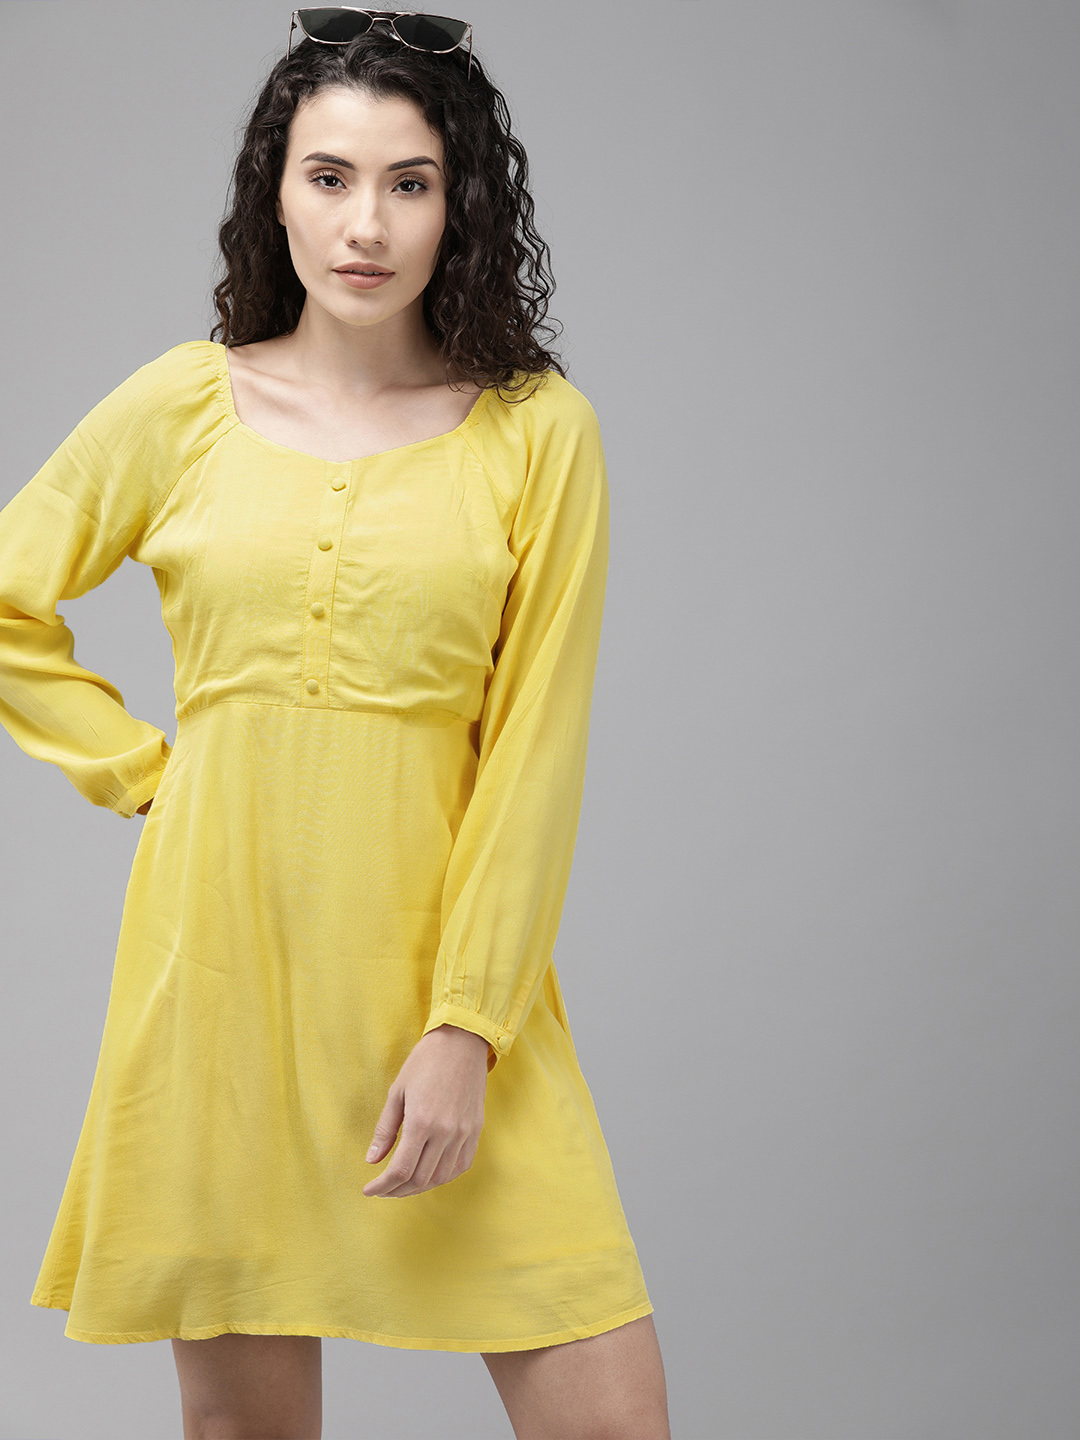 ONLY Women Yellow Solid A-Line Dress Price in India